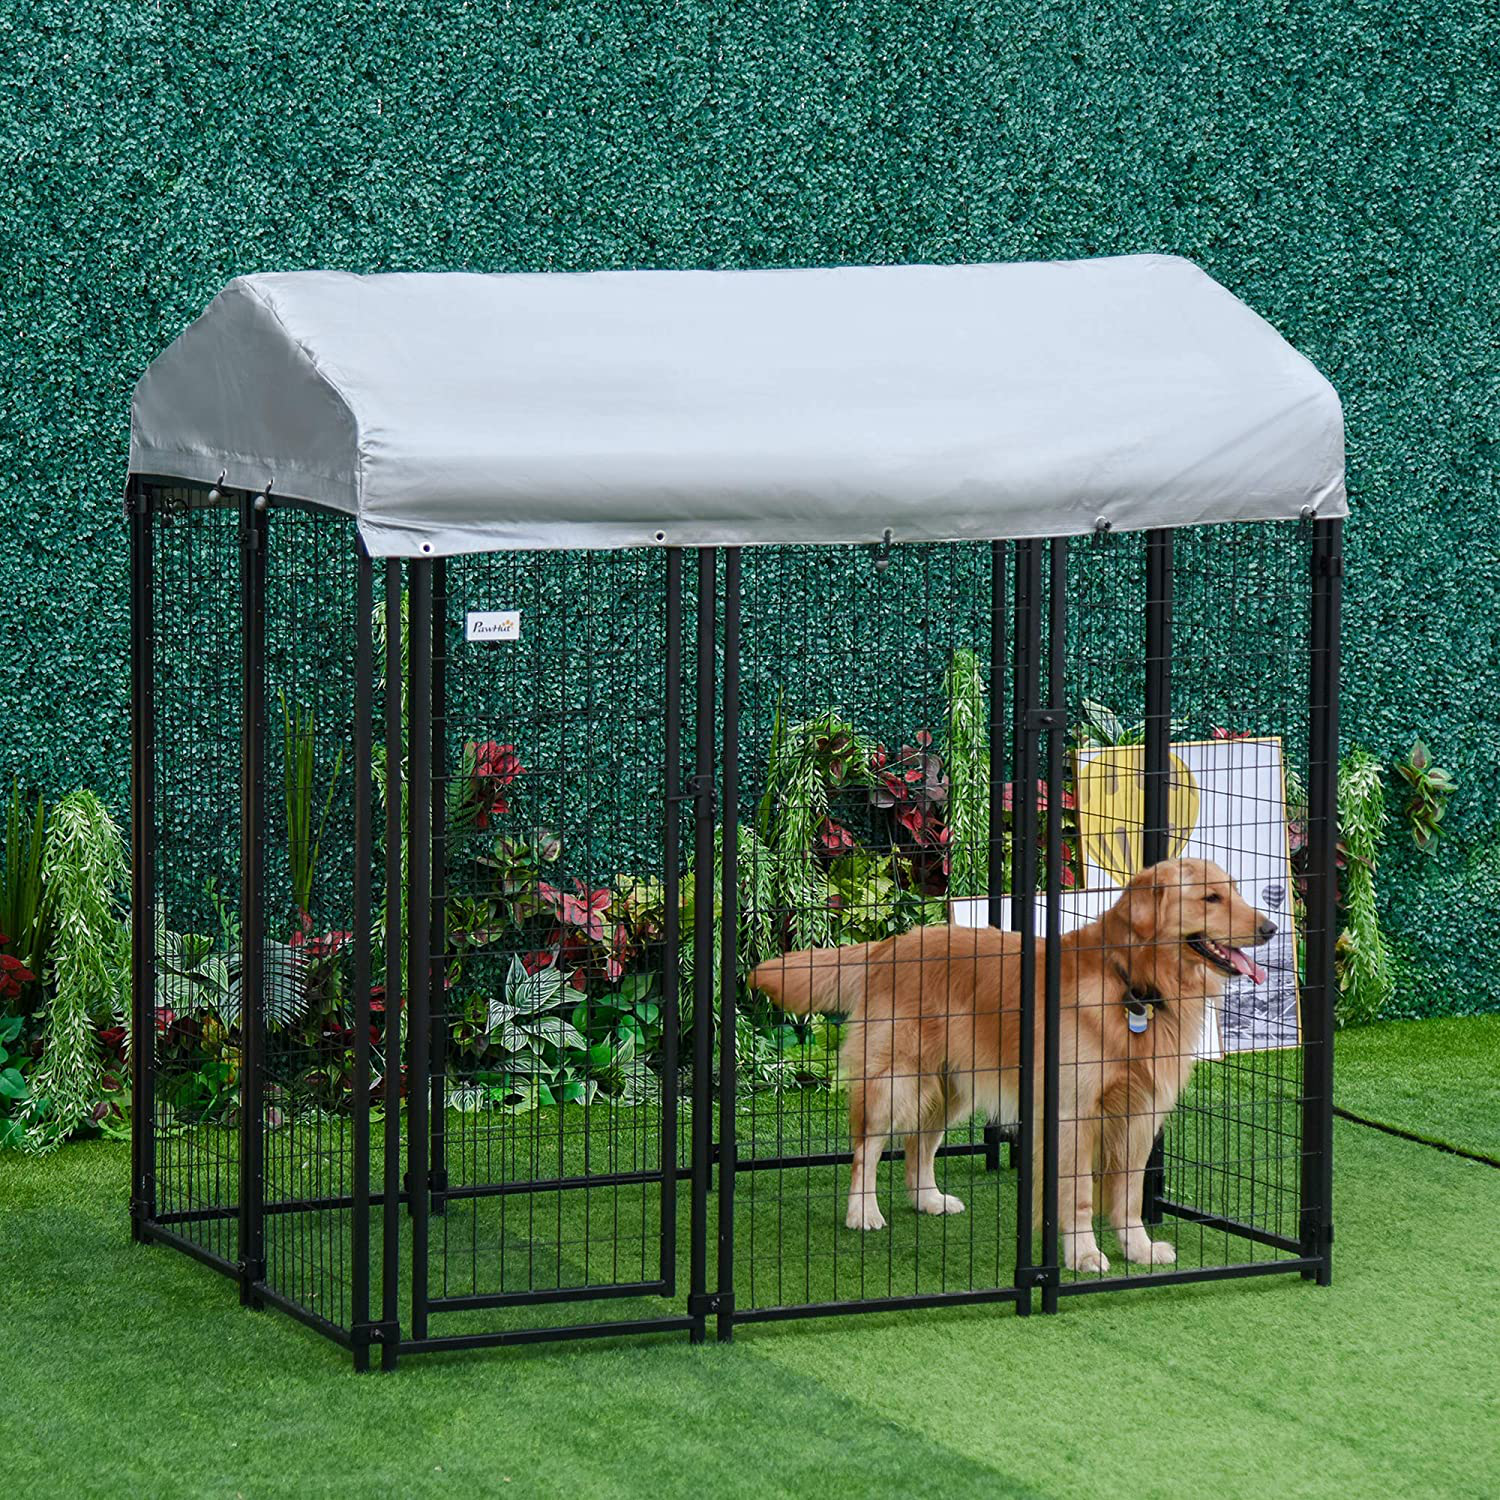 Pawhut Large Outdoor Dog Kennel Galvanized Steel Fence with Uv-Resistant Oxford Cloth Roof & Secure Lock